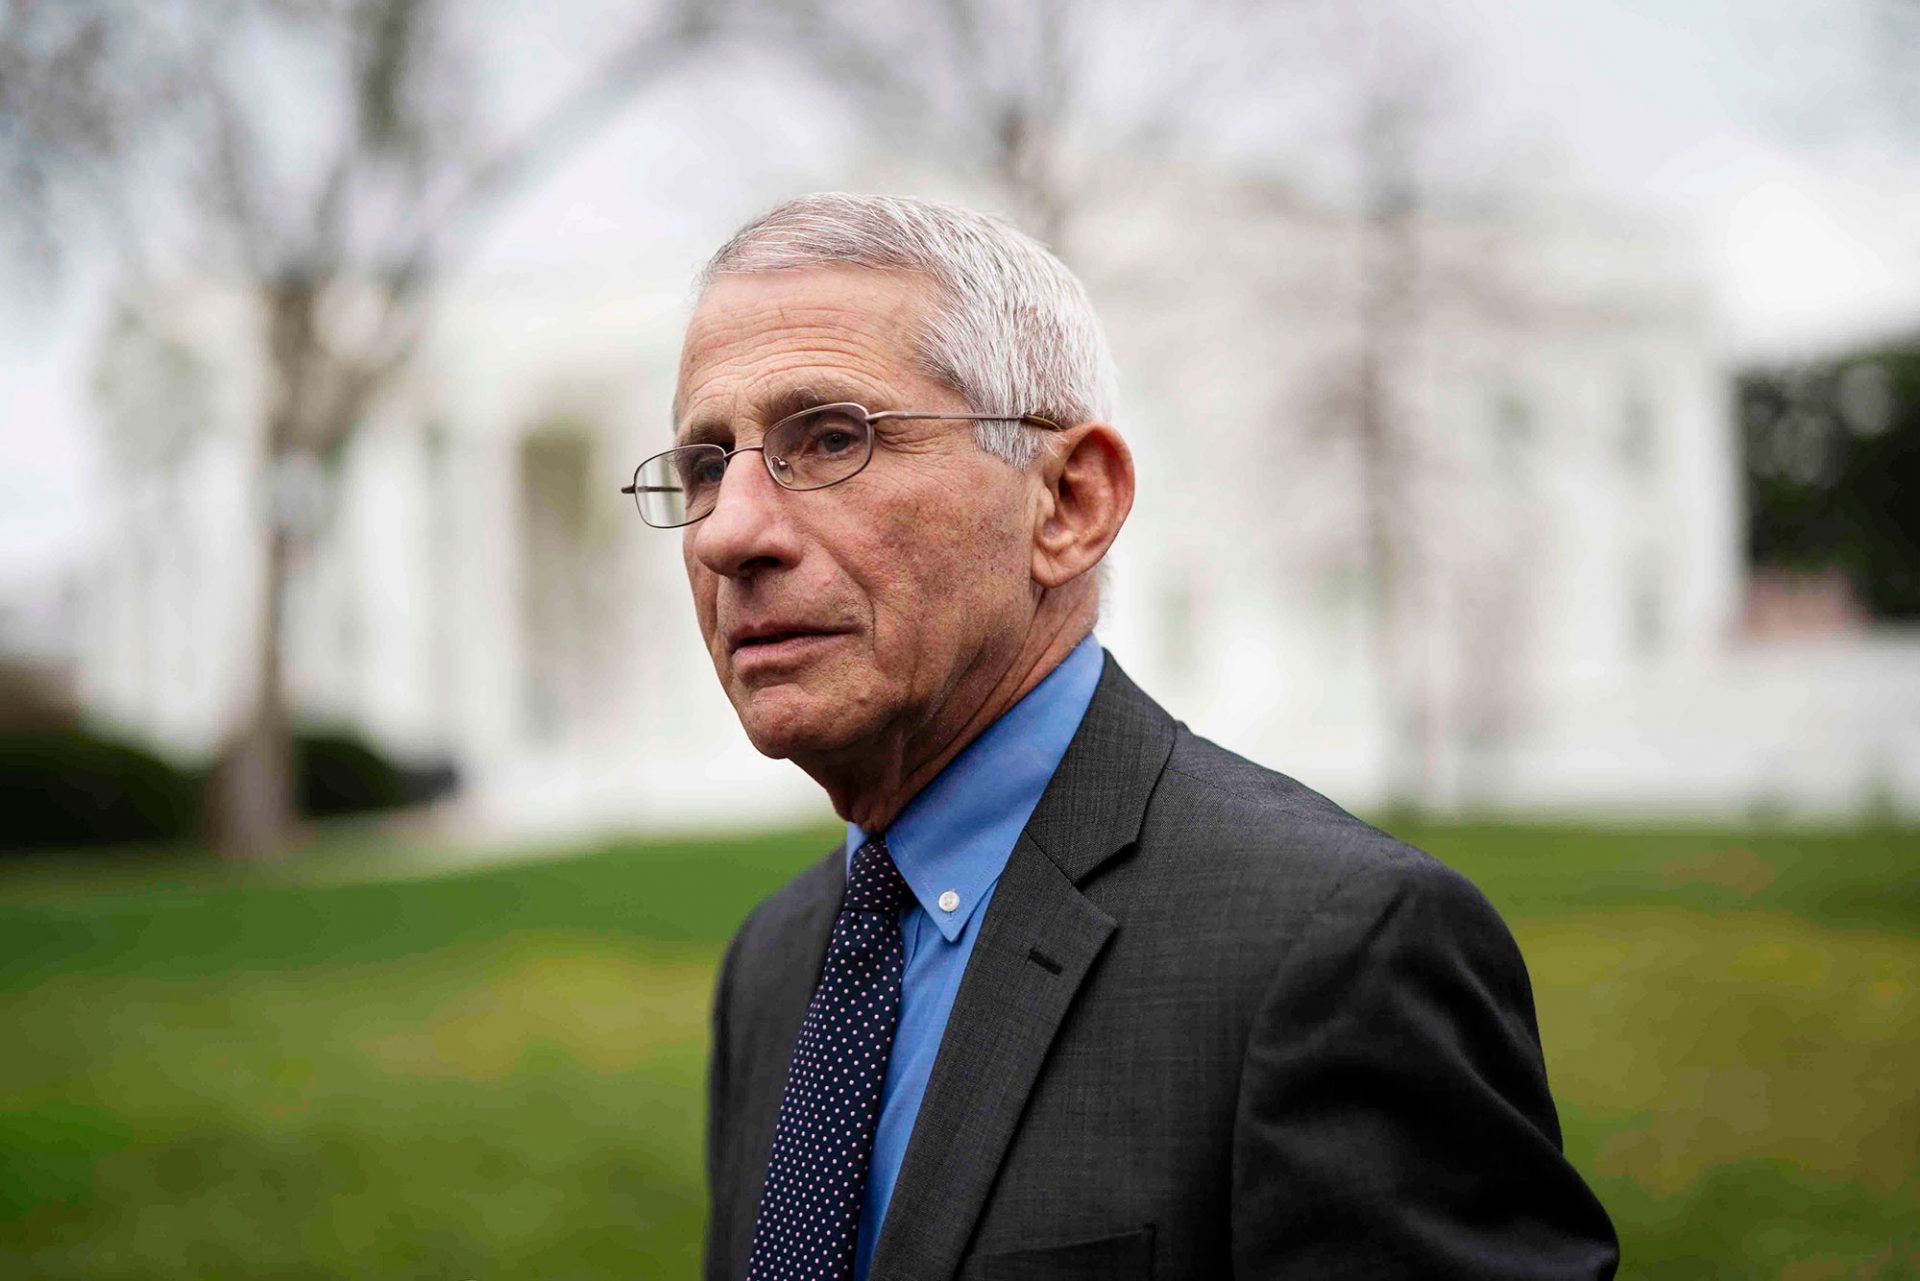 Republicans Are One Week Away From Initiating a “Lock Her Up” Chant for Anthony Fauci